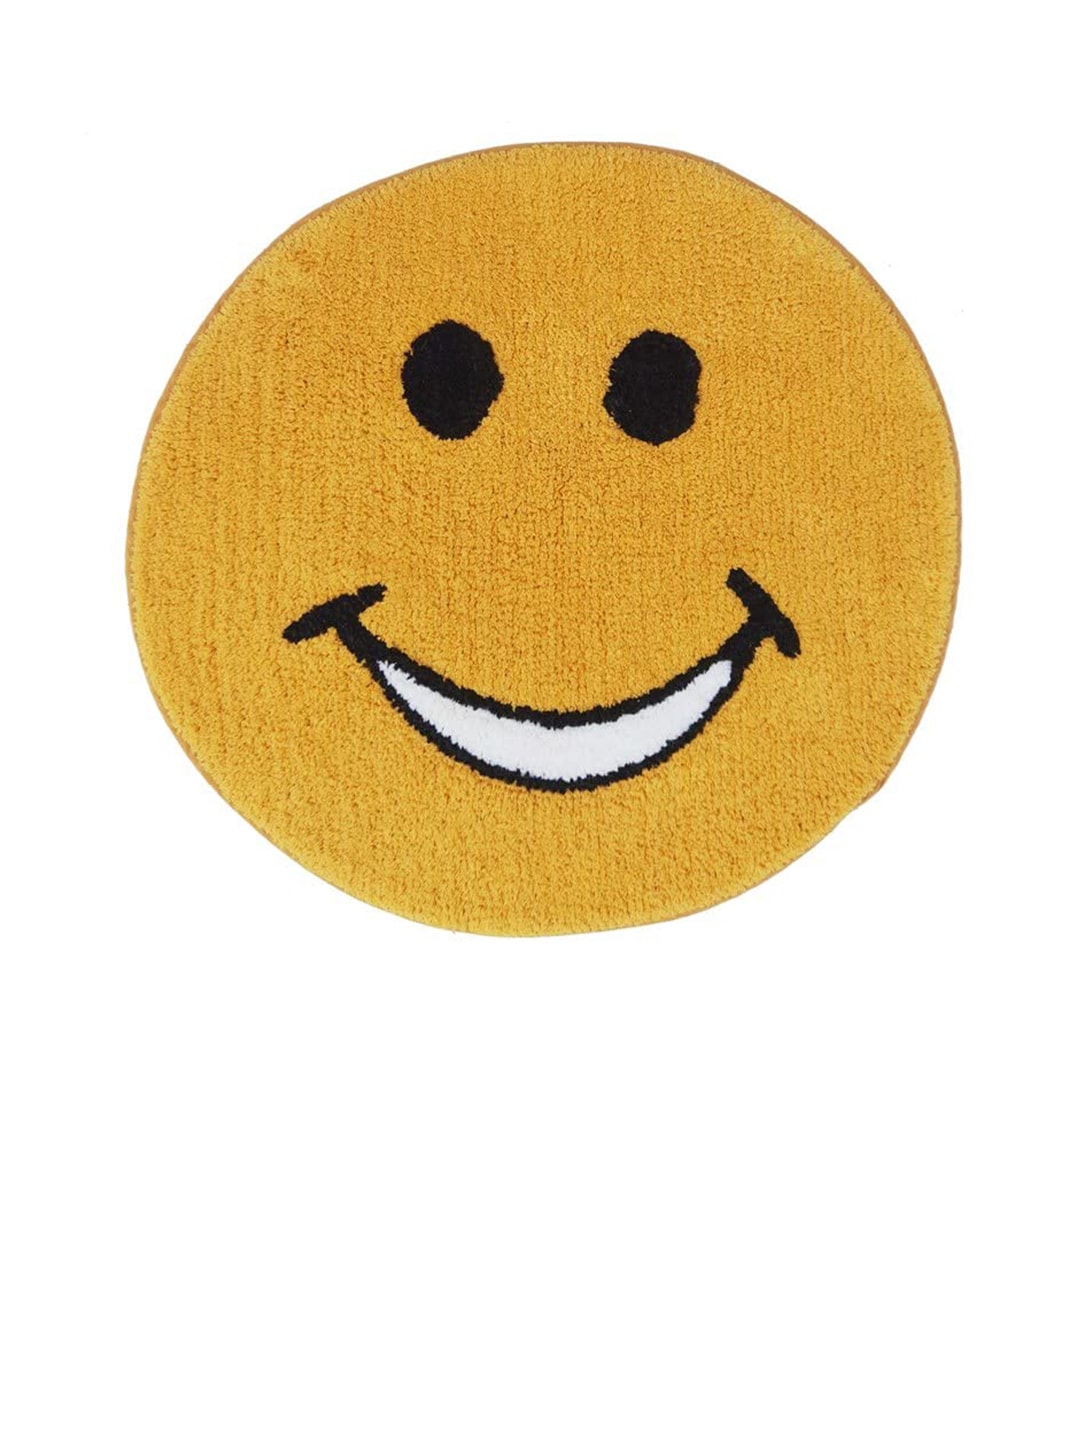 SWHF Yellow Smiley Shaped Doormat Price in India